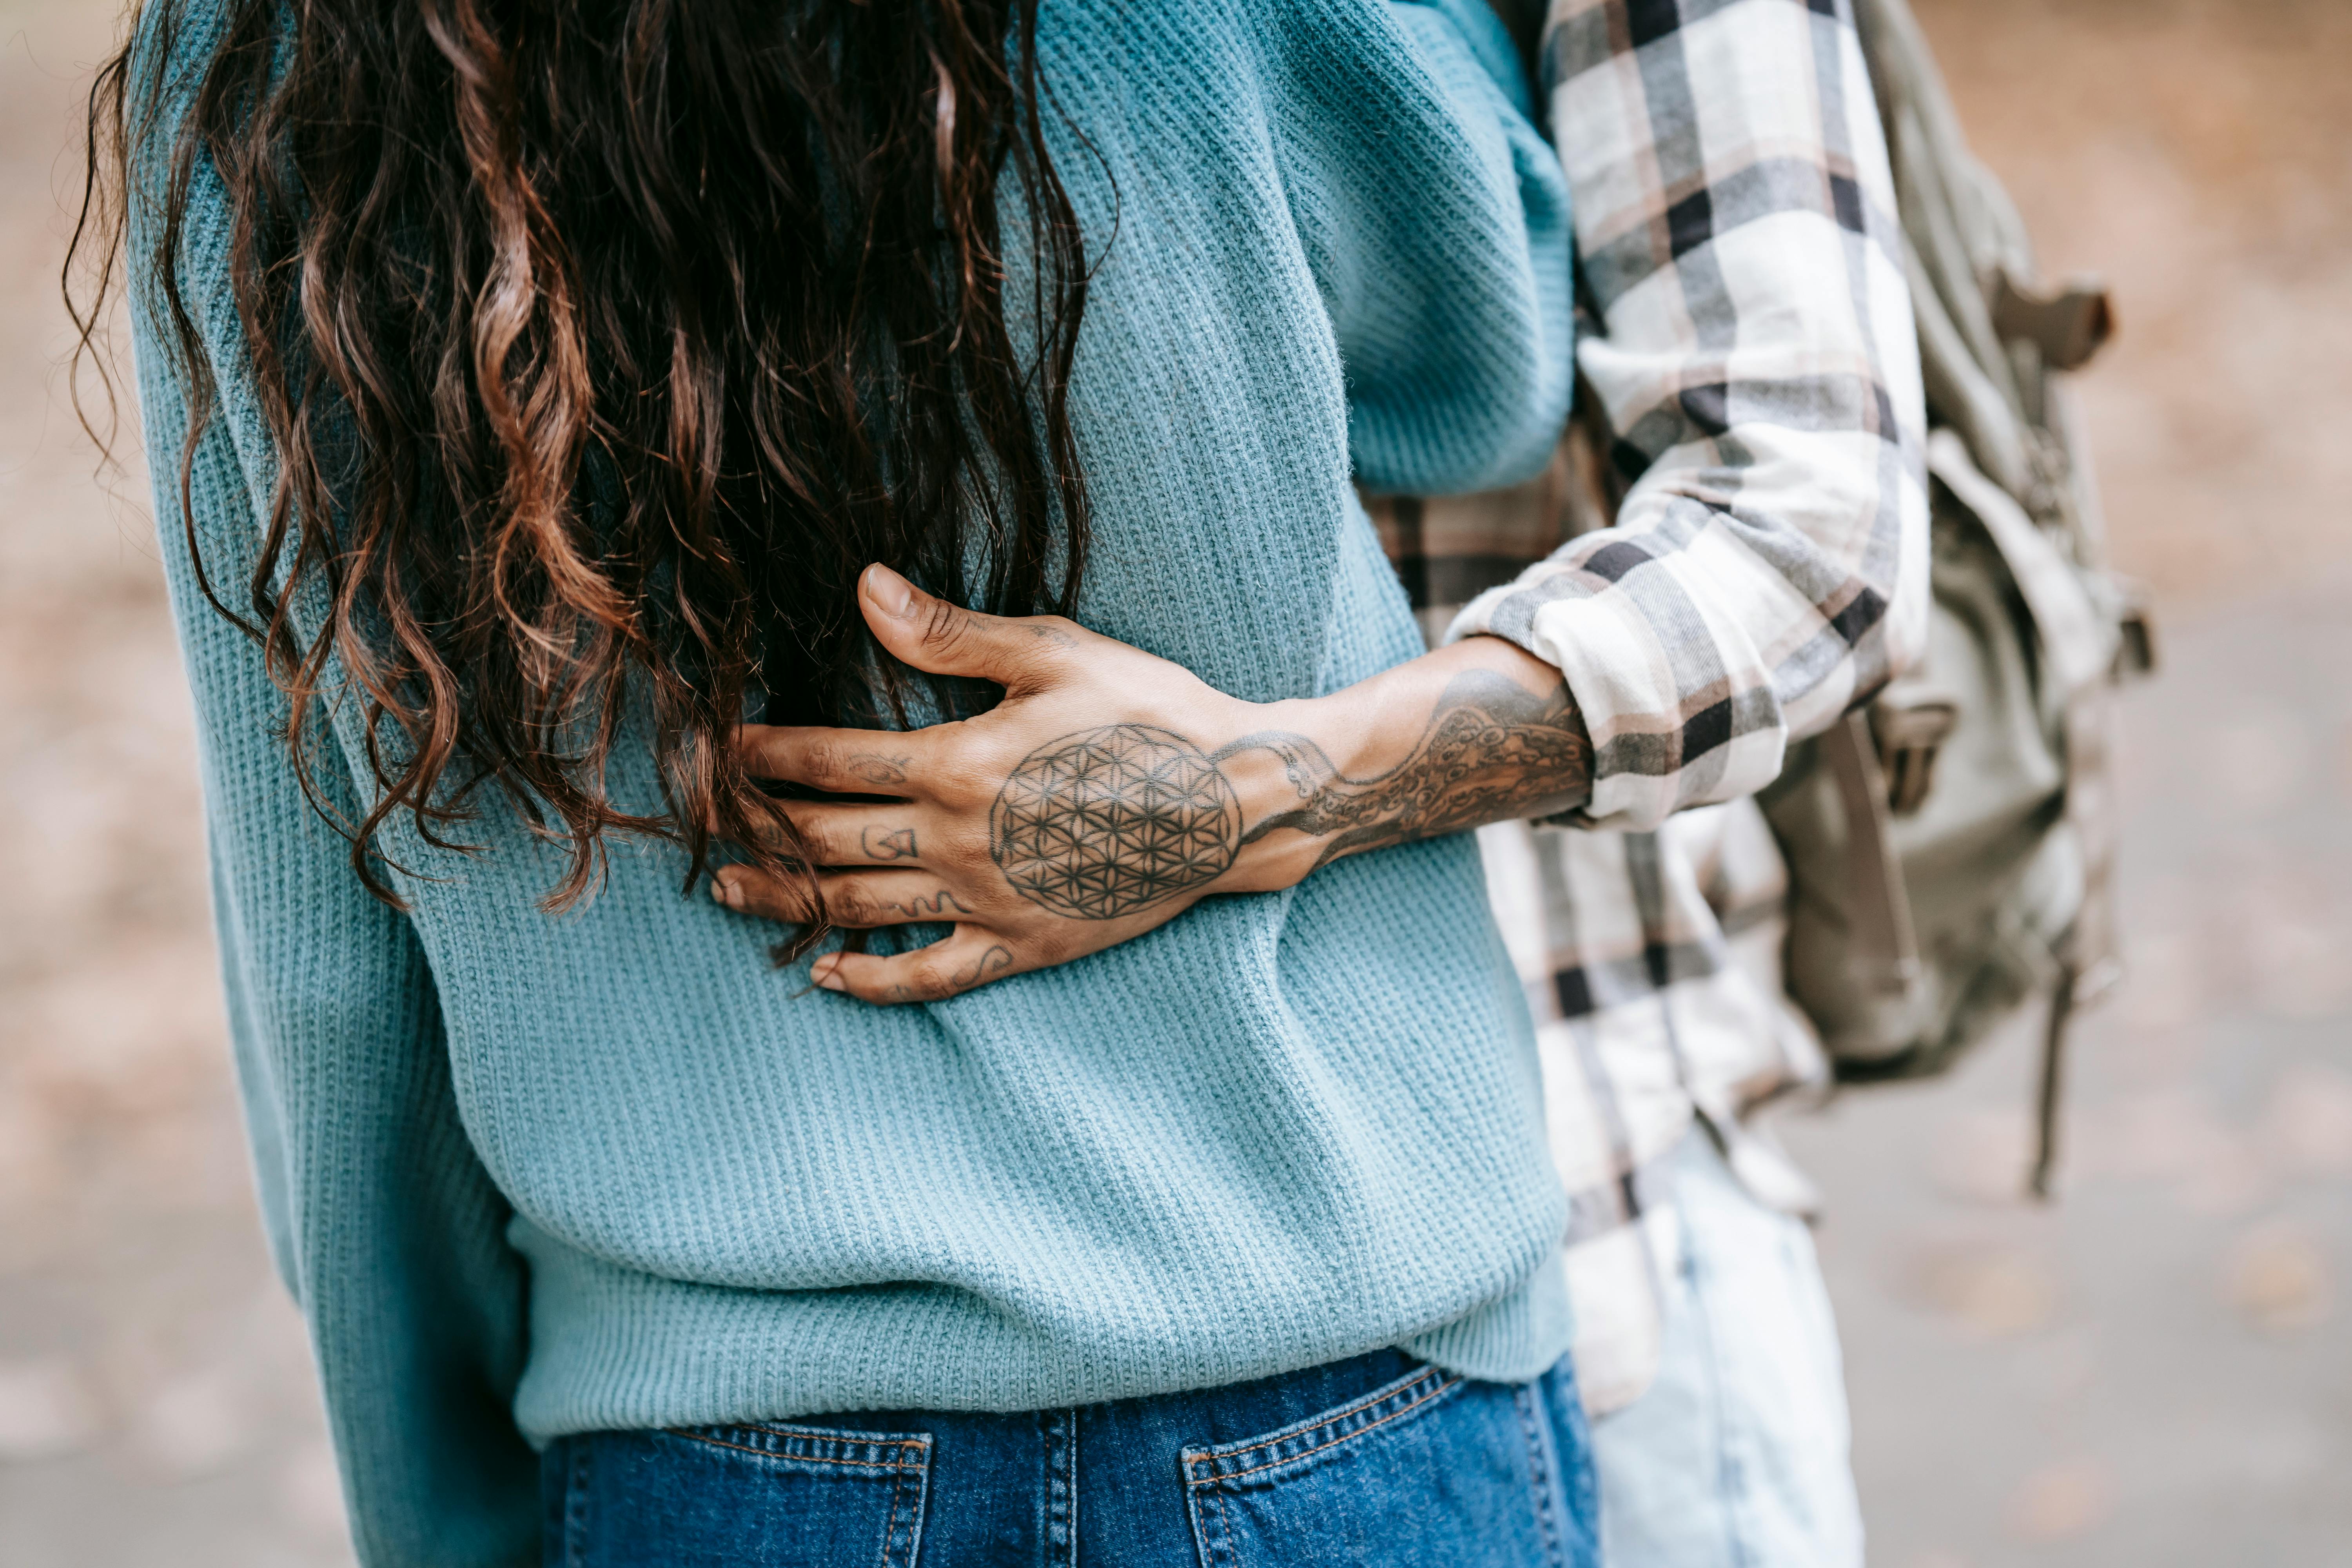 A man with tattoos gently cuddling girlfriend | Source: Pexels